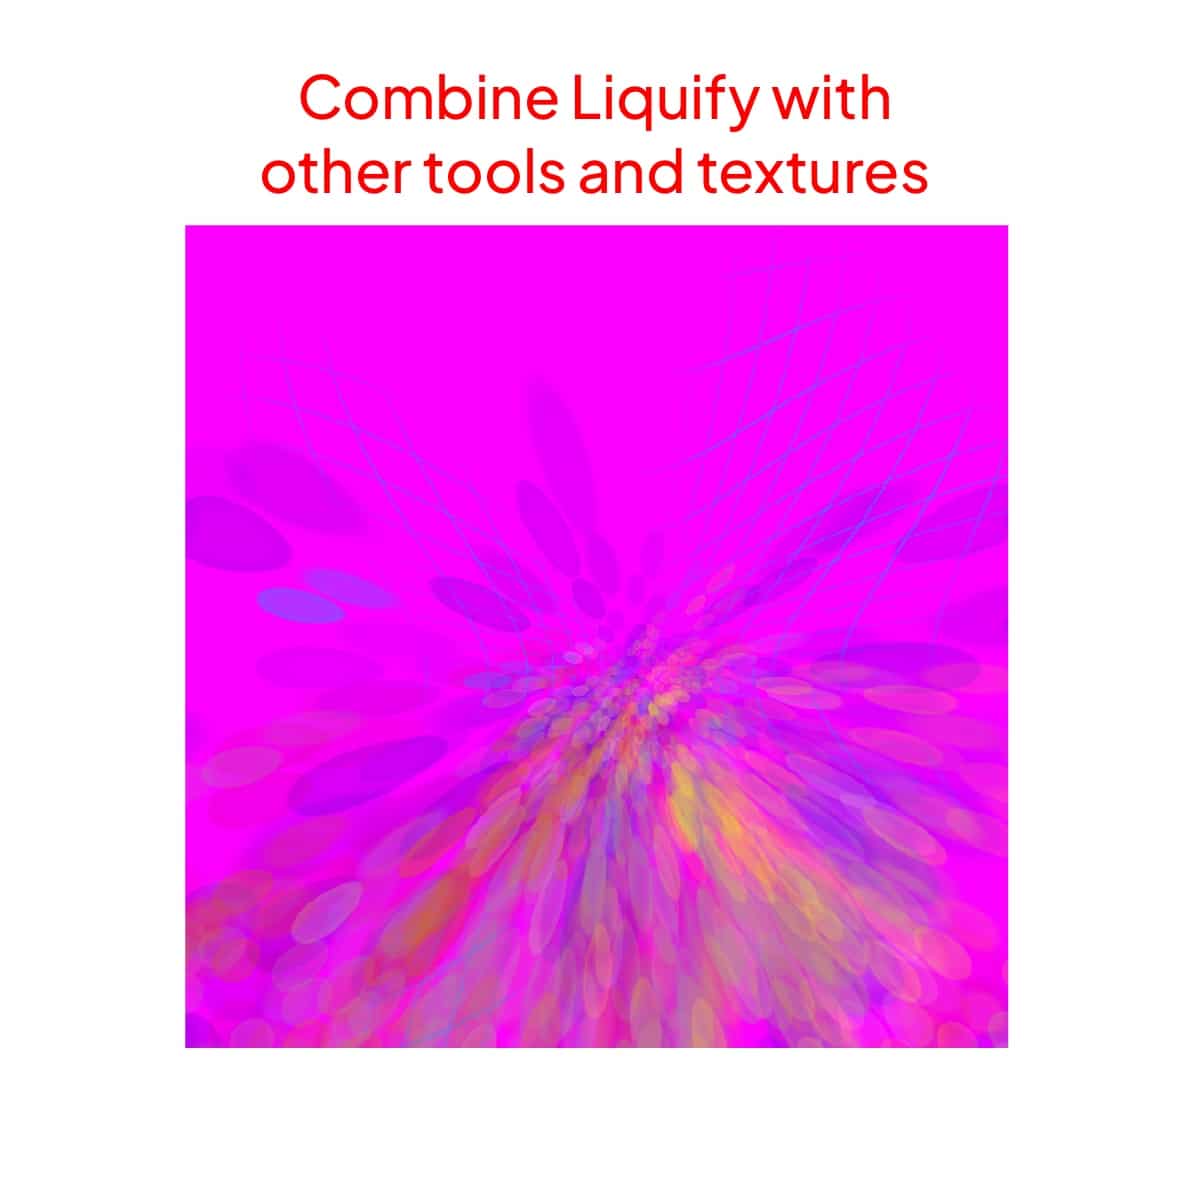 Combining Liquify and other tools